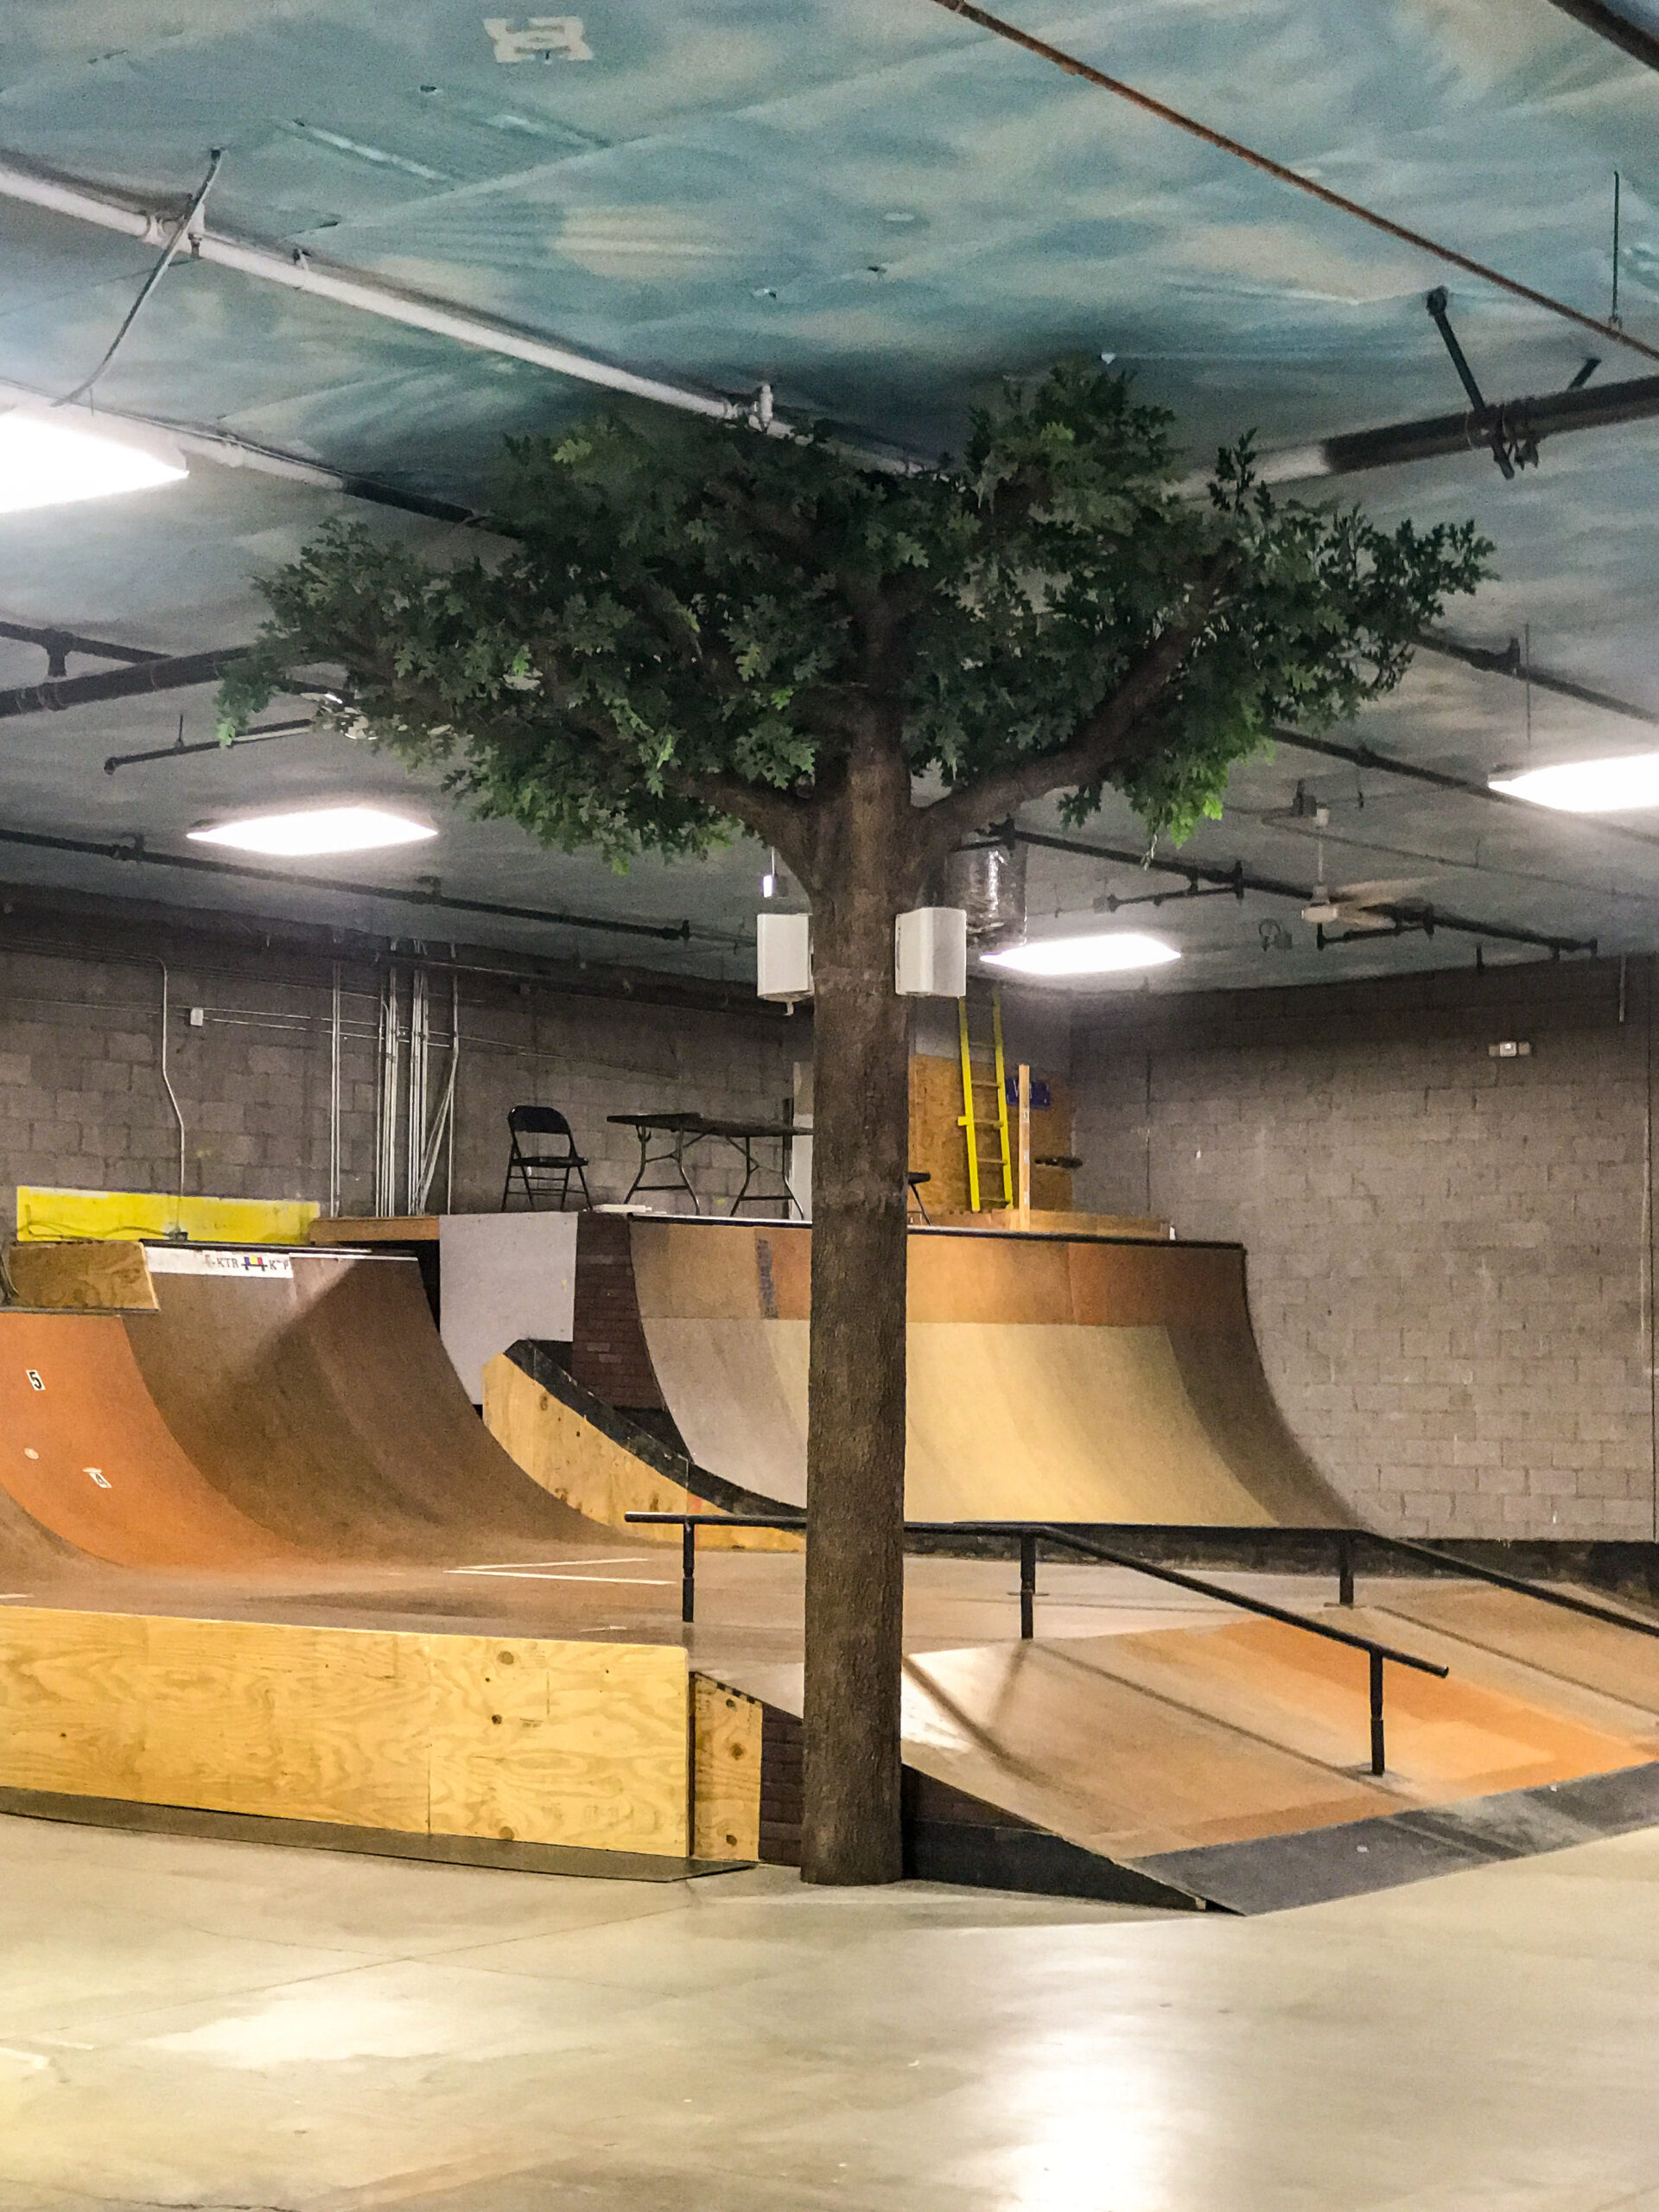 KTR Indoor Action Sports Playground Faux Tree